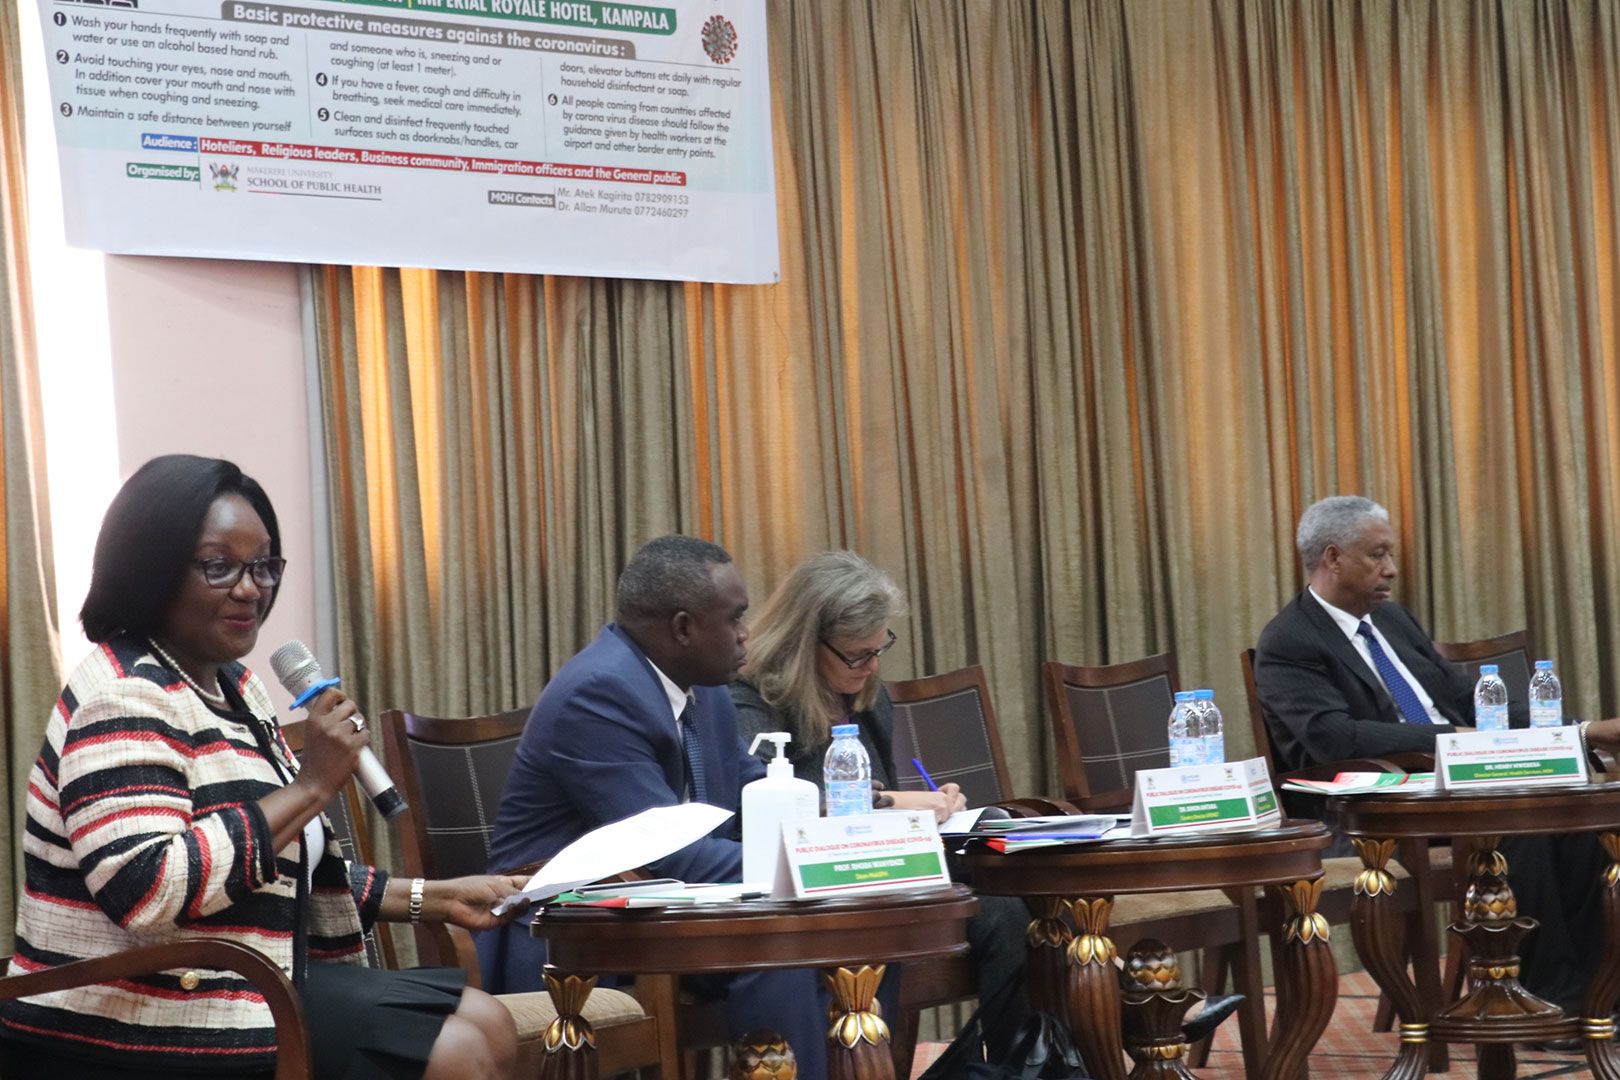 The Dean, MakSPH -Prof,Rhoda Wanyenze , The Director, AFENET-Mr.Simon Antara,  Dr.Lisa Nelson, the US Centres For Disease Control(CDC) Country Director and  Dr. Yonas Tegegn Woldemariam, the World Health Organization-WHO country representative at the Public Dialogue on Friday 13th March, 2020 at the Imperial Royale Hotel